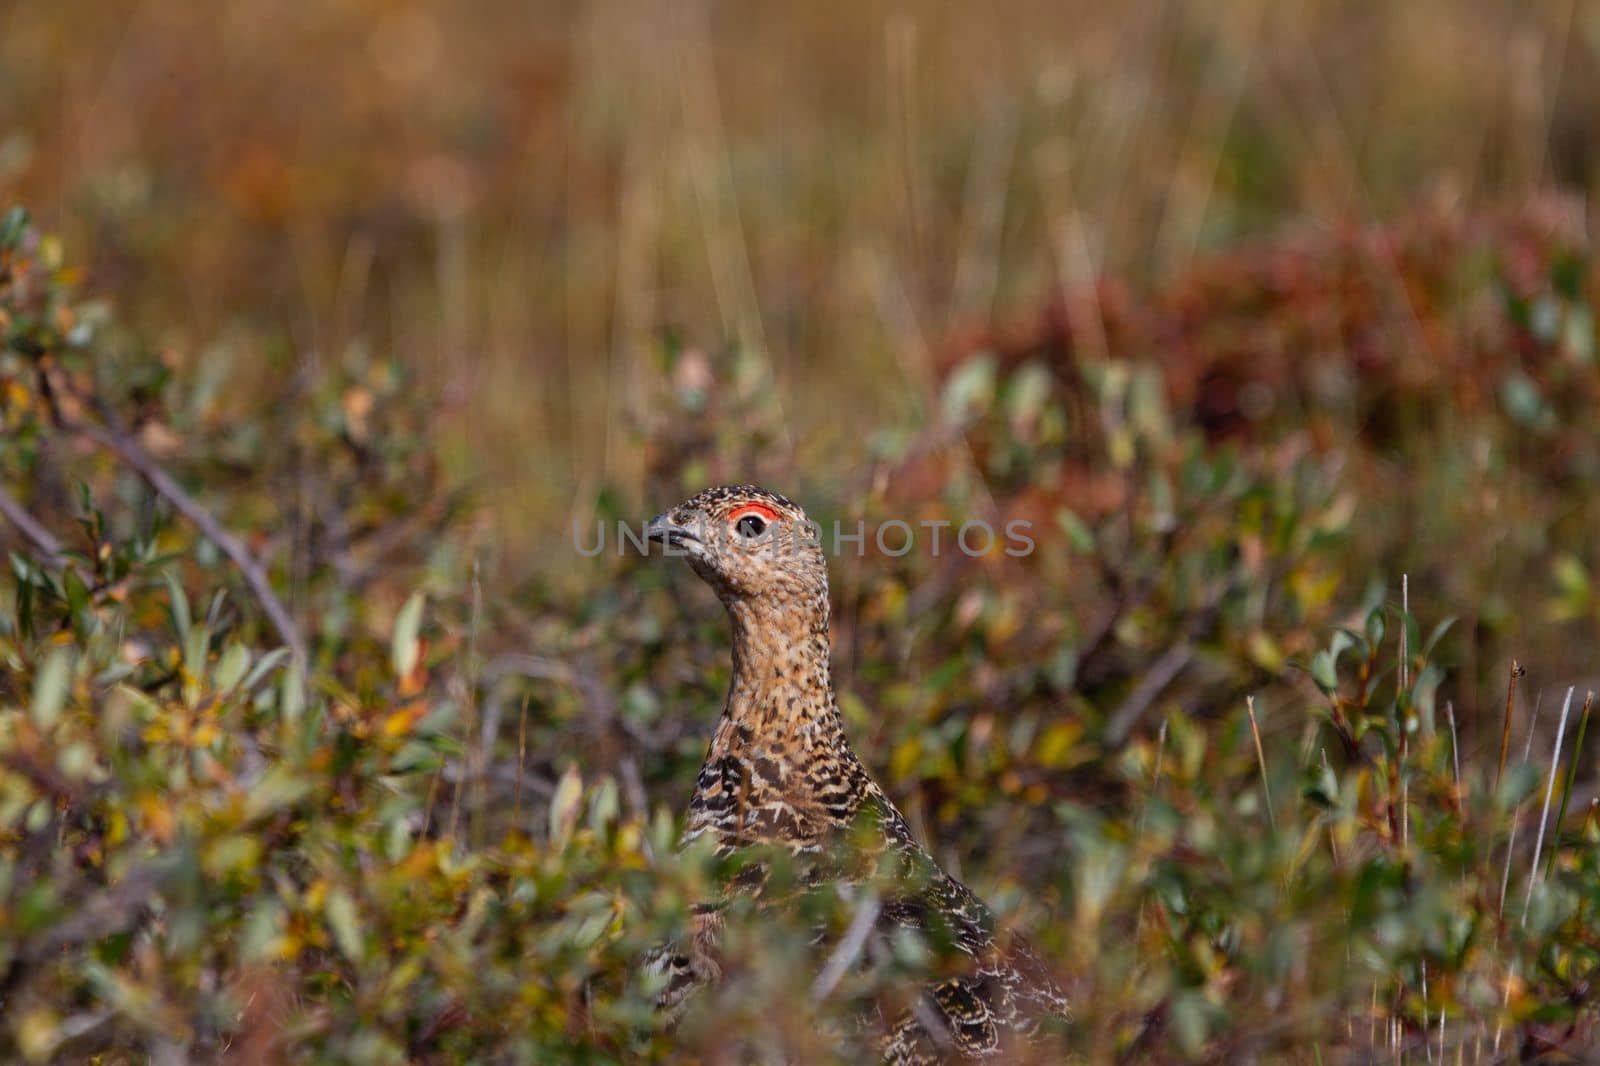 A willow ptarmigan, Lagopus lagopus, in summer searching for food among tundra willows in the Canadian arctic, near Arviat, Nunavut